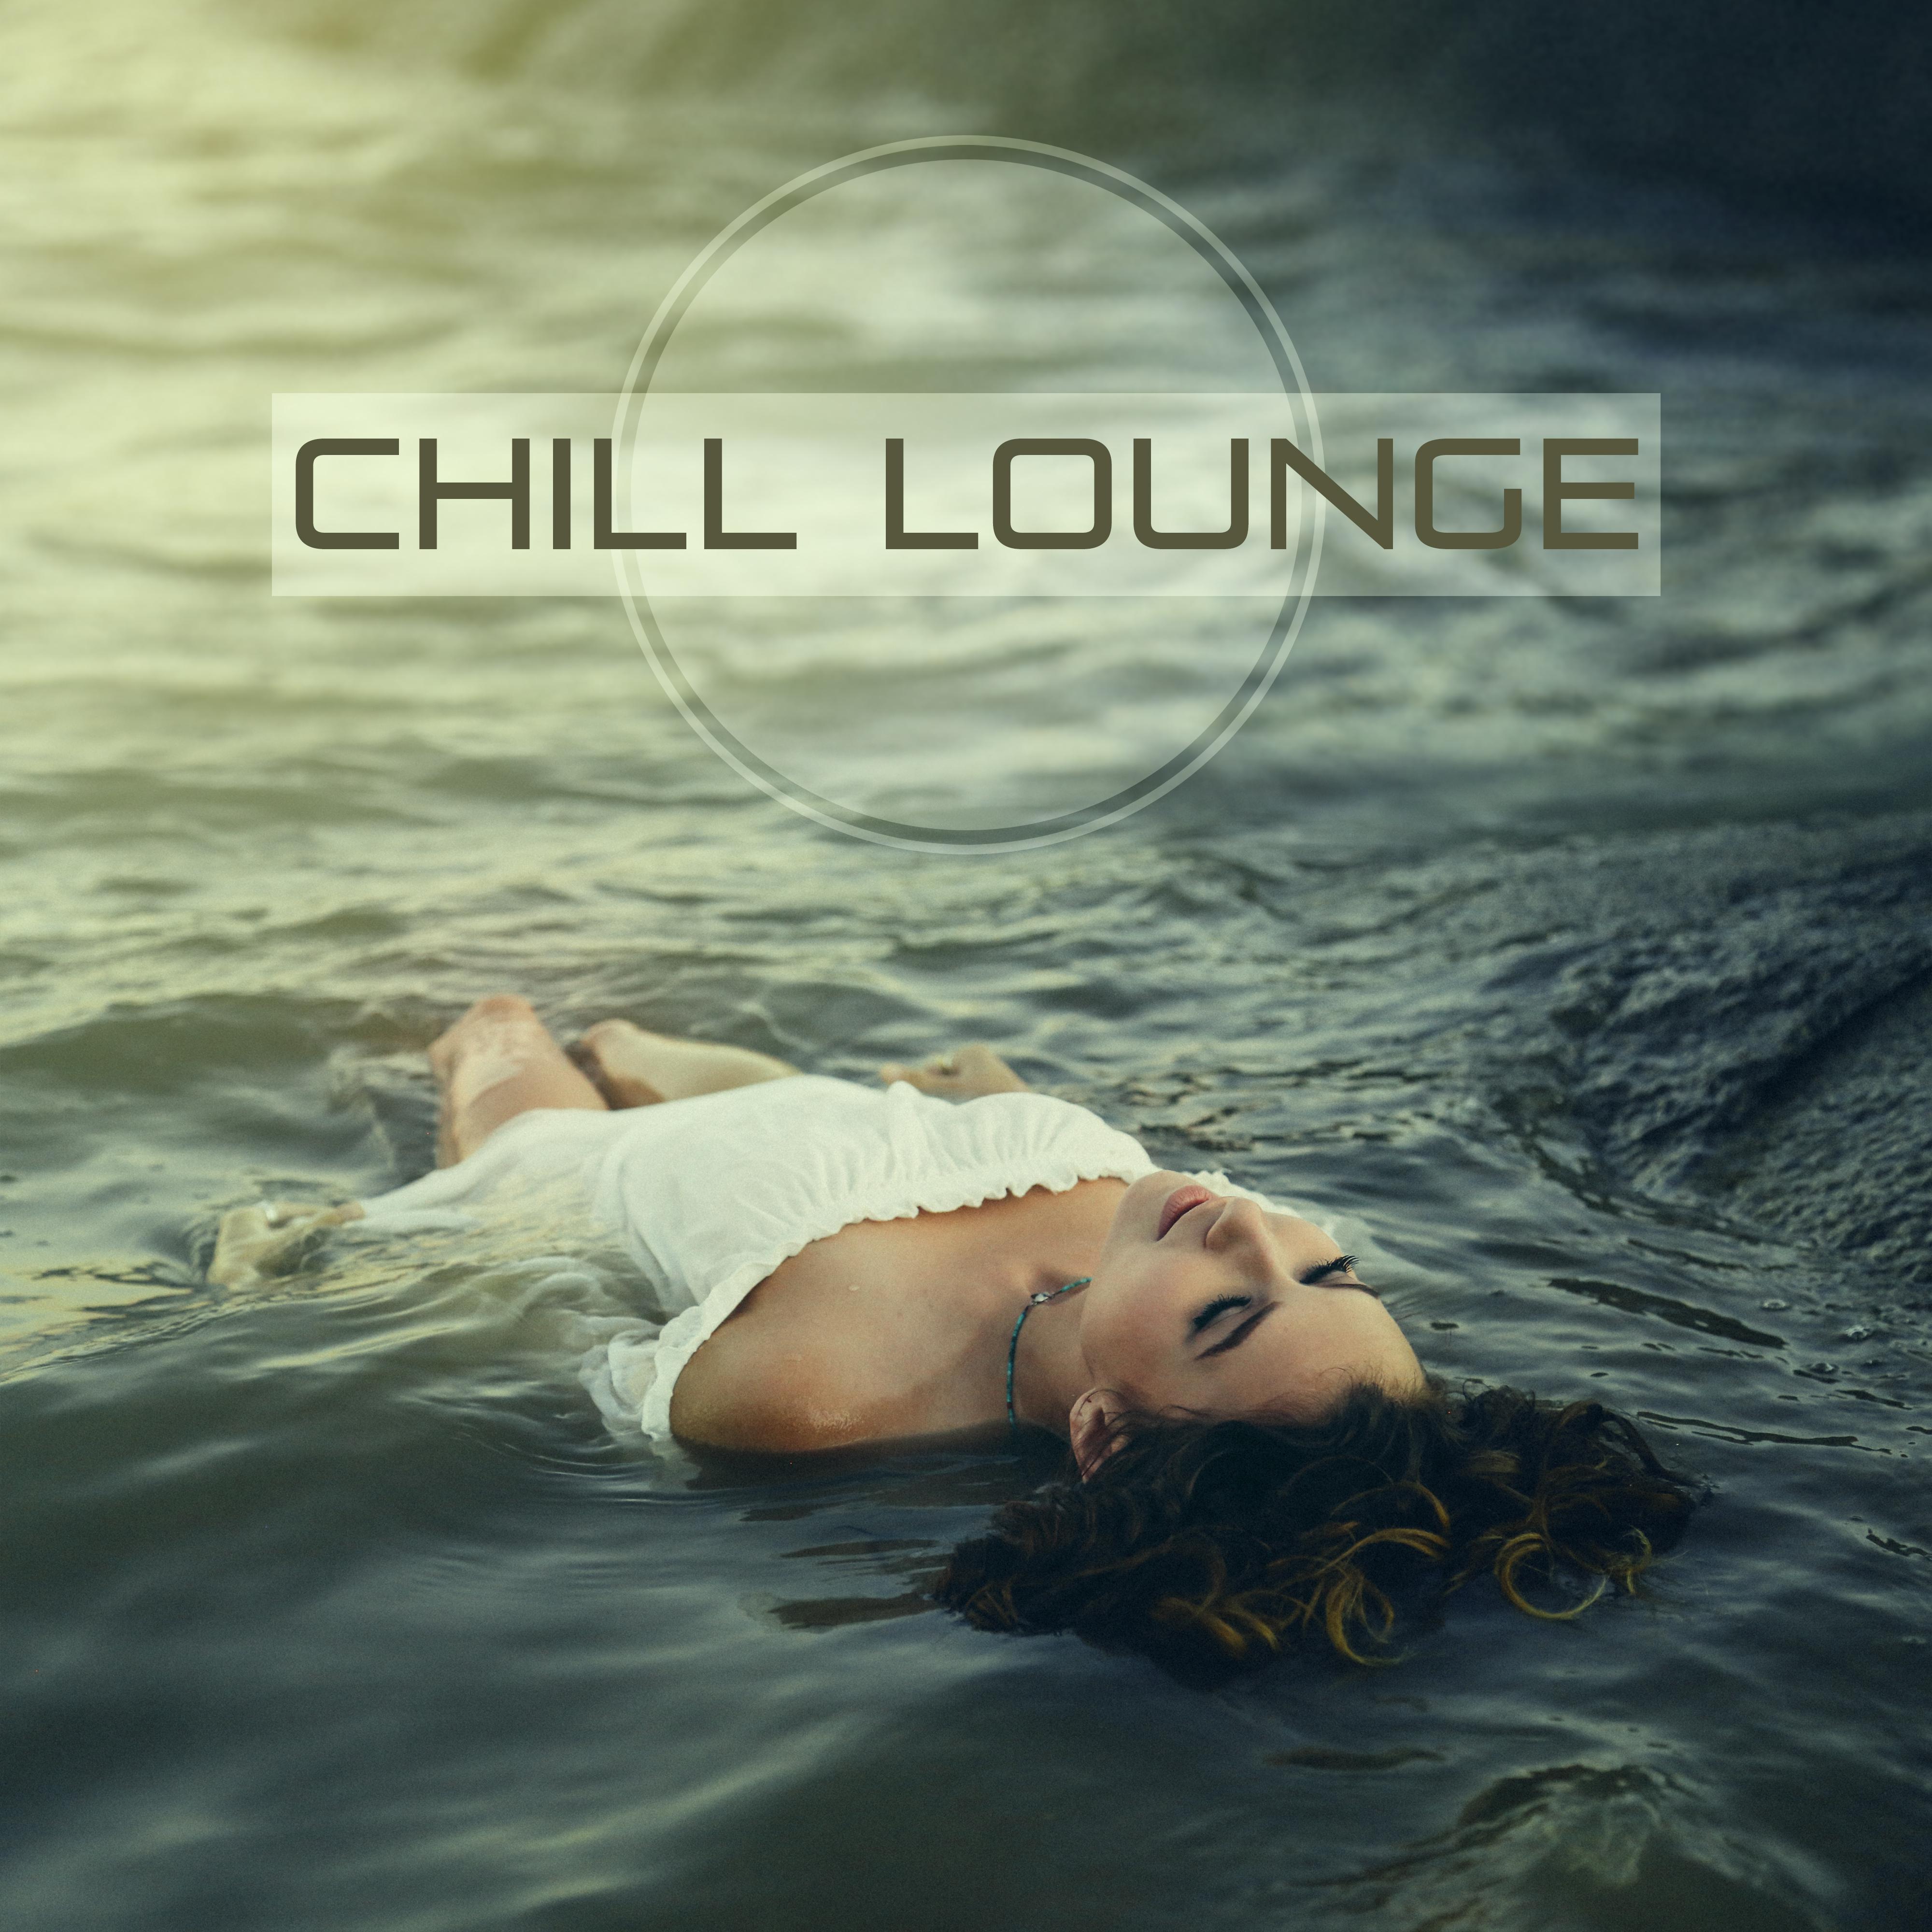 Chill Lounge – Chillout Relaxation, Relax Yourself, Beach Drinks, Cocktail Bar